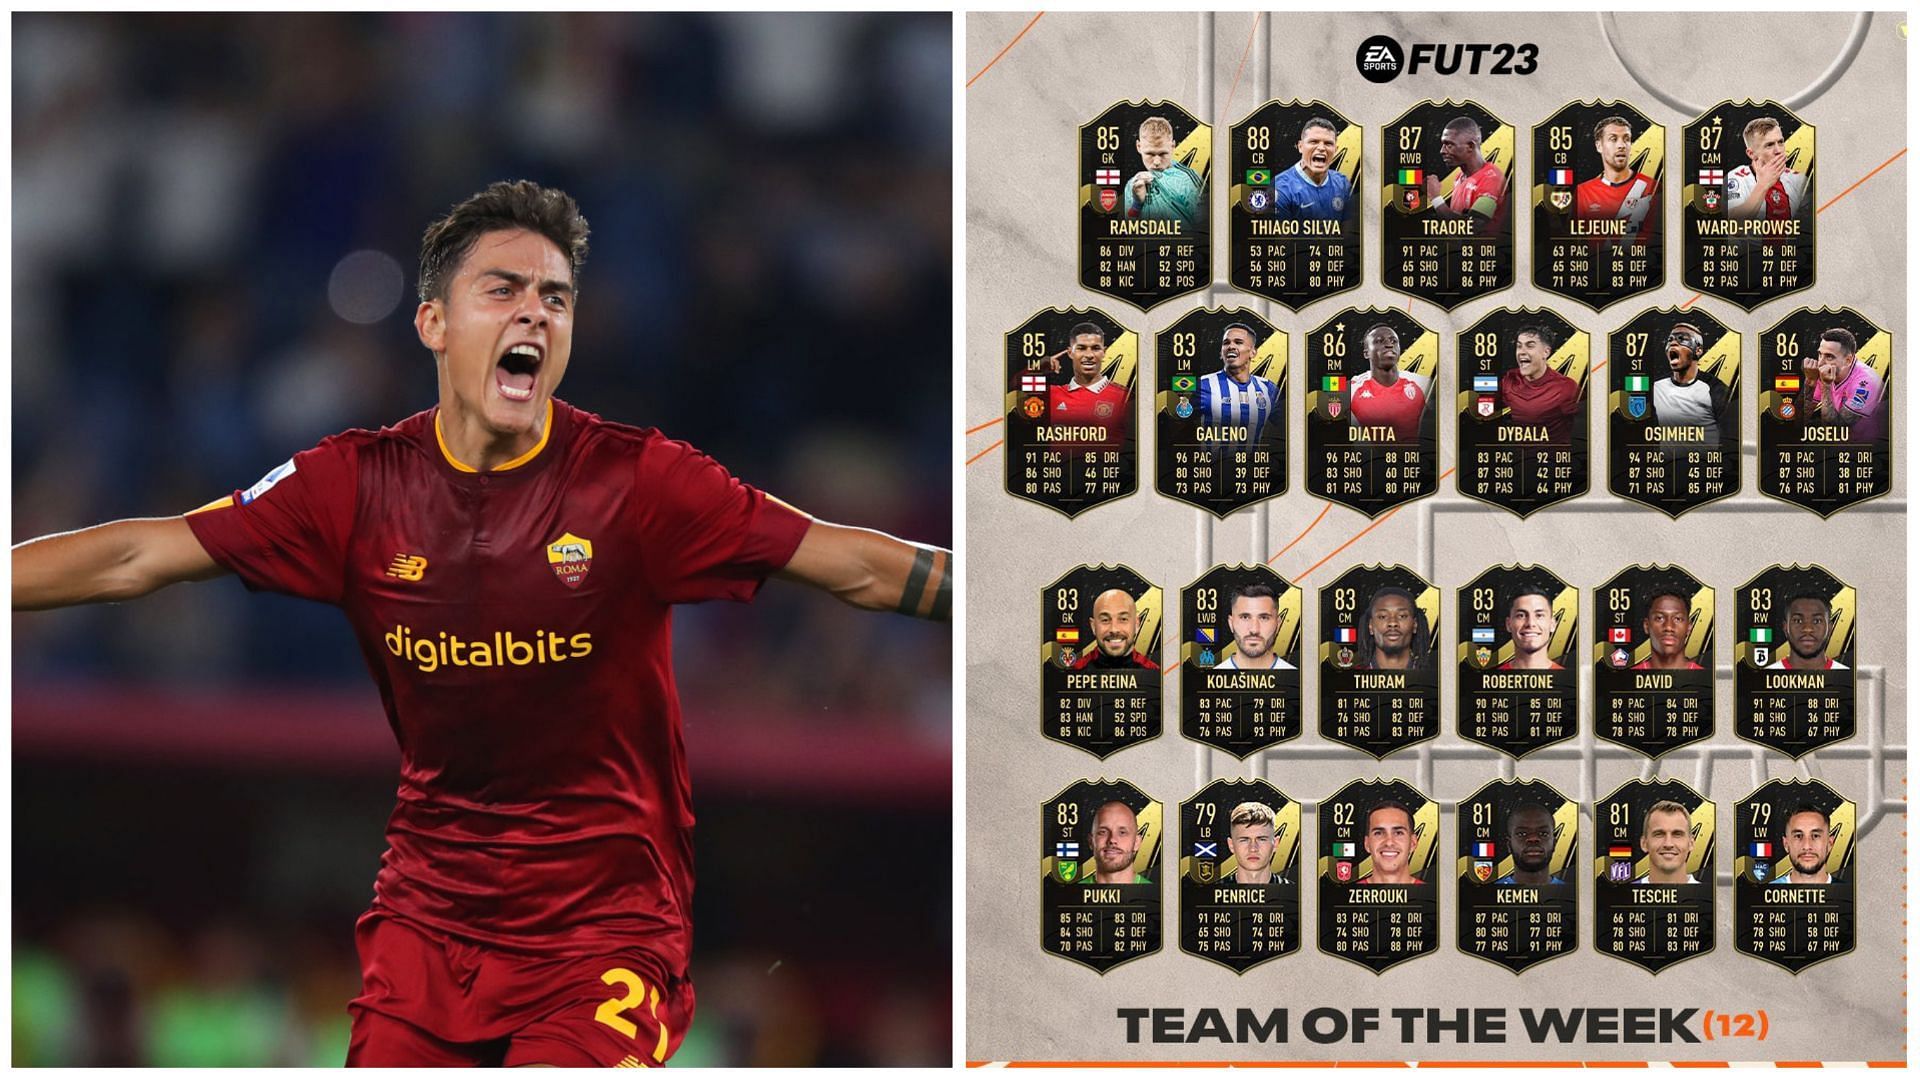 TOTW 12 is live in FIFA 23 (Images via Getty and EA Sports)